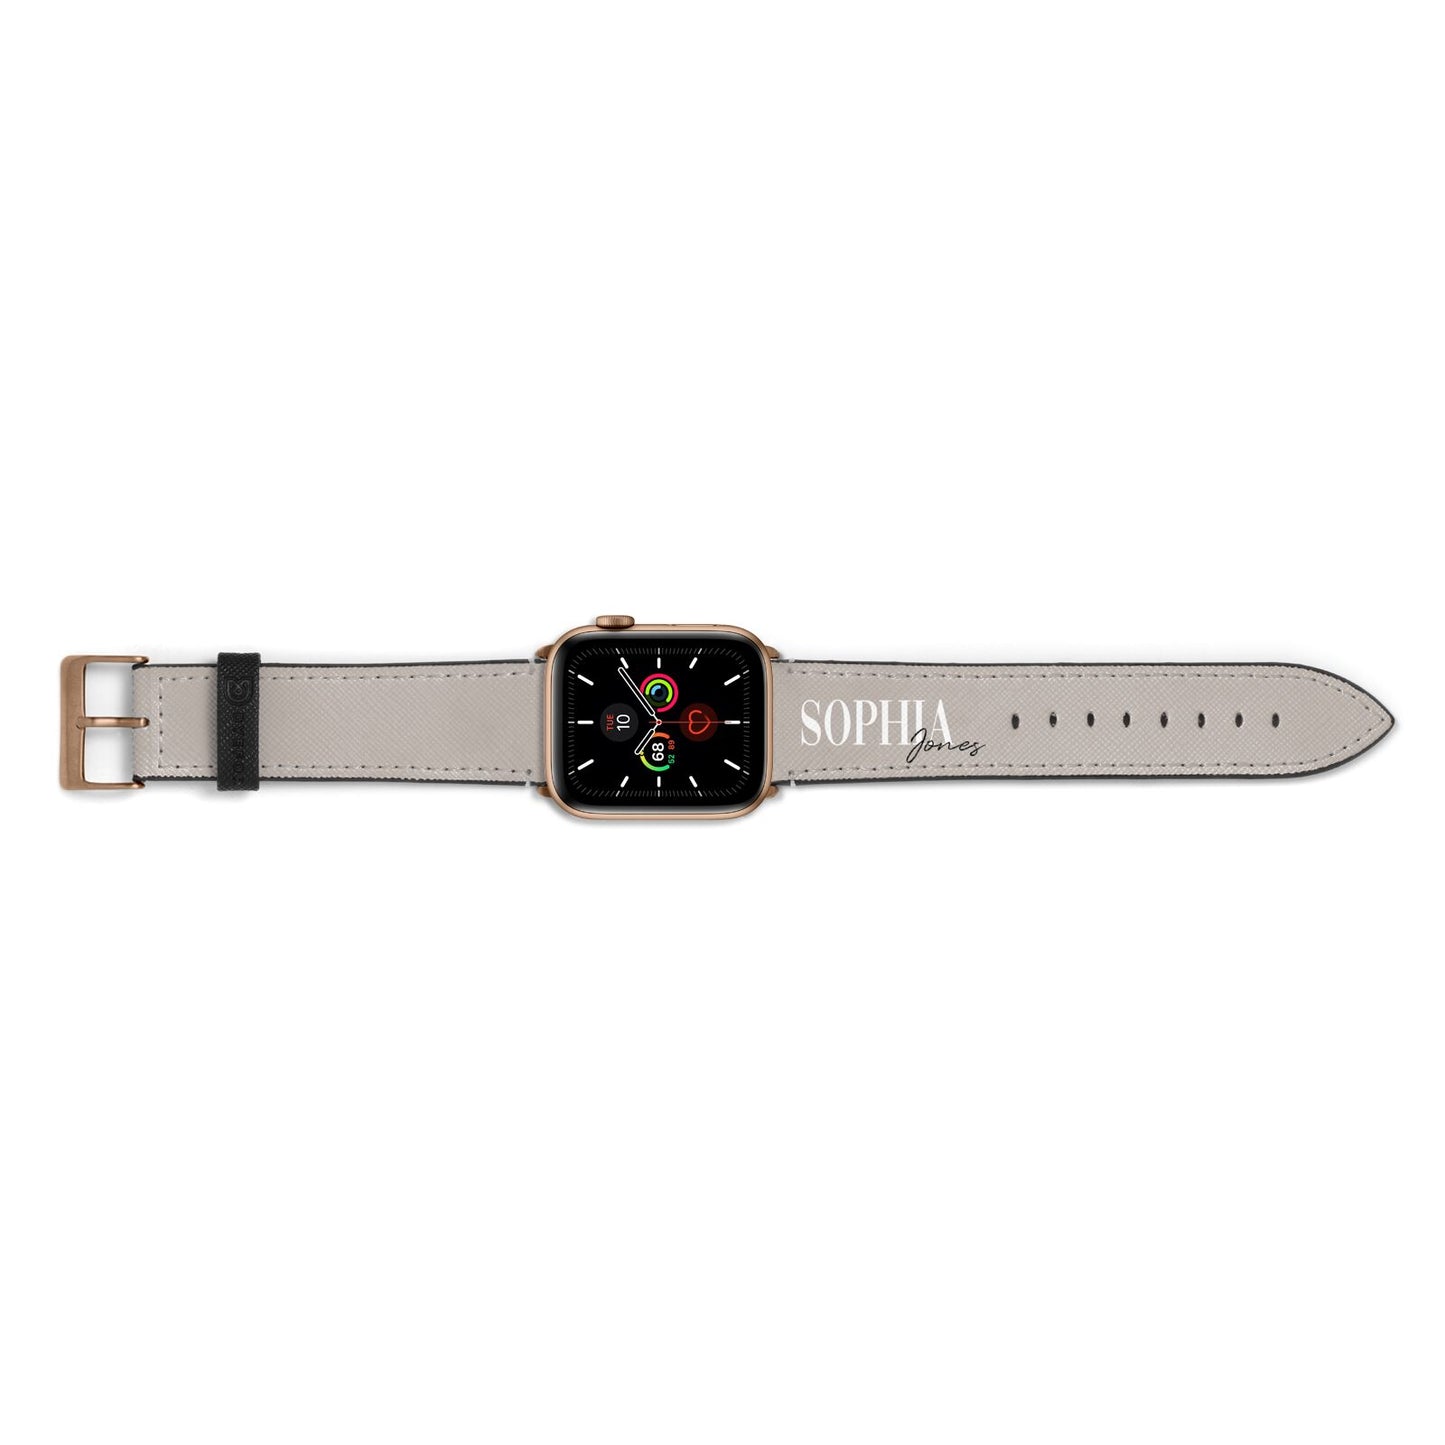 Stone Colour with Personalised Name Apple Watch Strap Landscape Image Gold Hardware